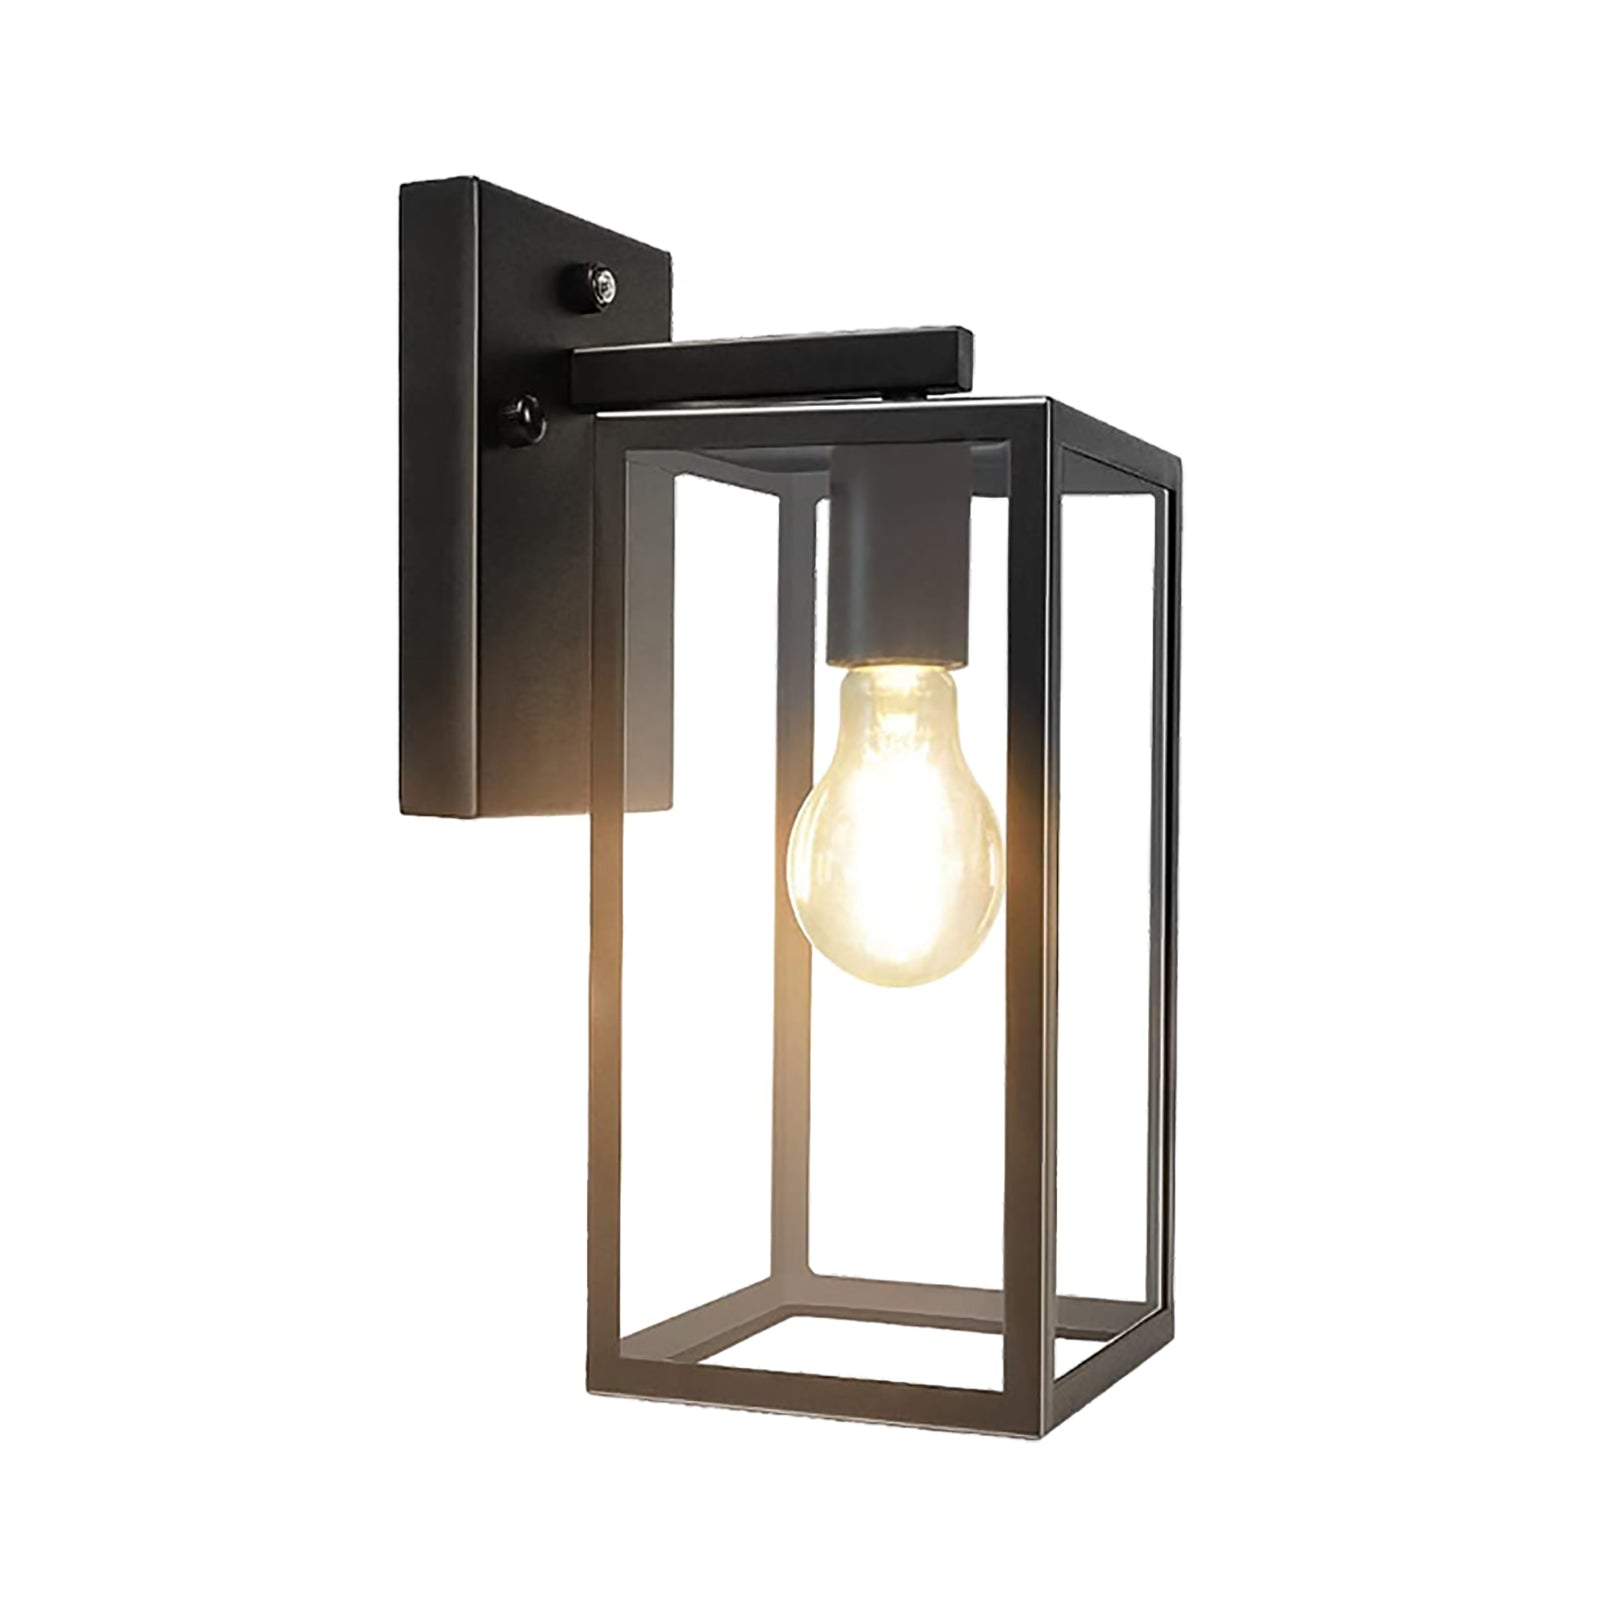 DLLT 40W Outdoor Indoor Wall Sconce, Dusk to Dawn Auto Sensor Wall Lamp, Outdoor Light Fixtures Wall Mount Anti-Rust Matte Black Wall Lantern with Clear Glass Shade for Garage Doorway Entryway - WSWL006-B 1 | Depuley